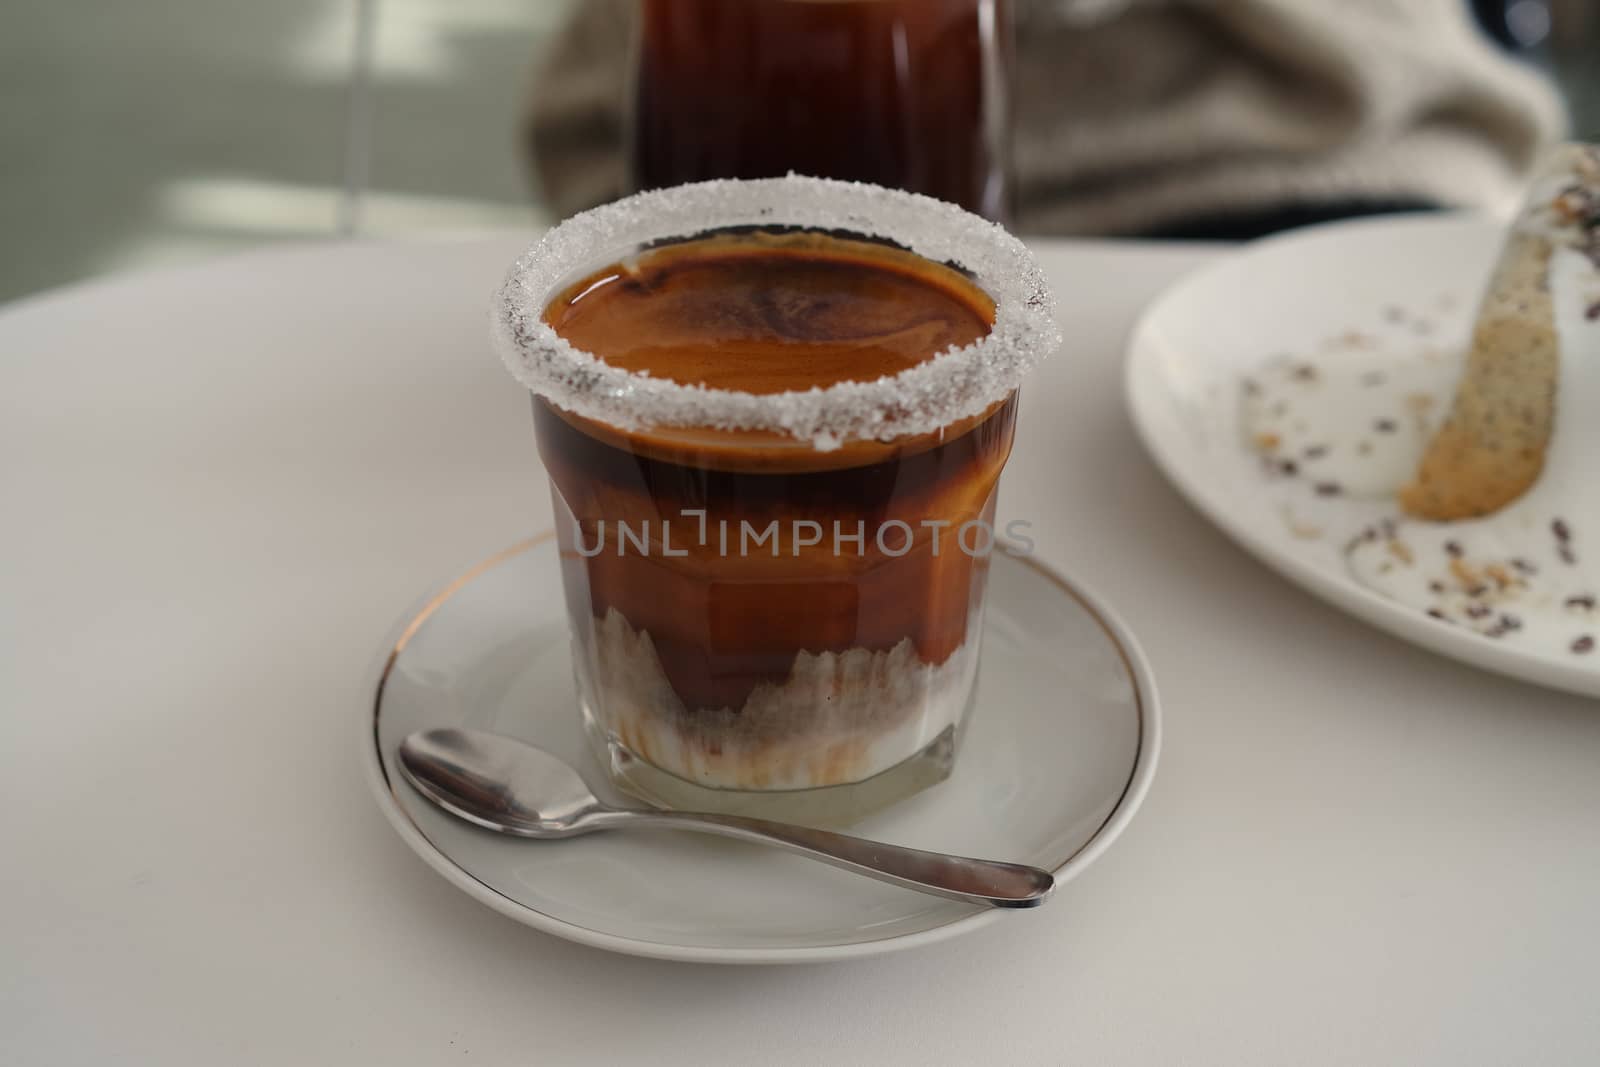 Spoon and cup of coffee on table by uphotopia